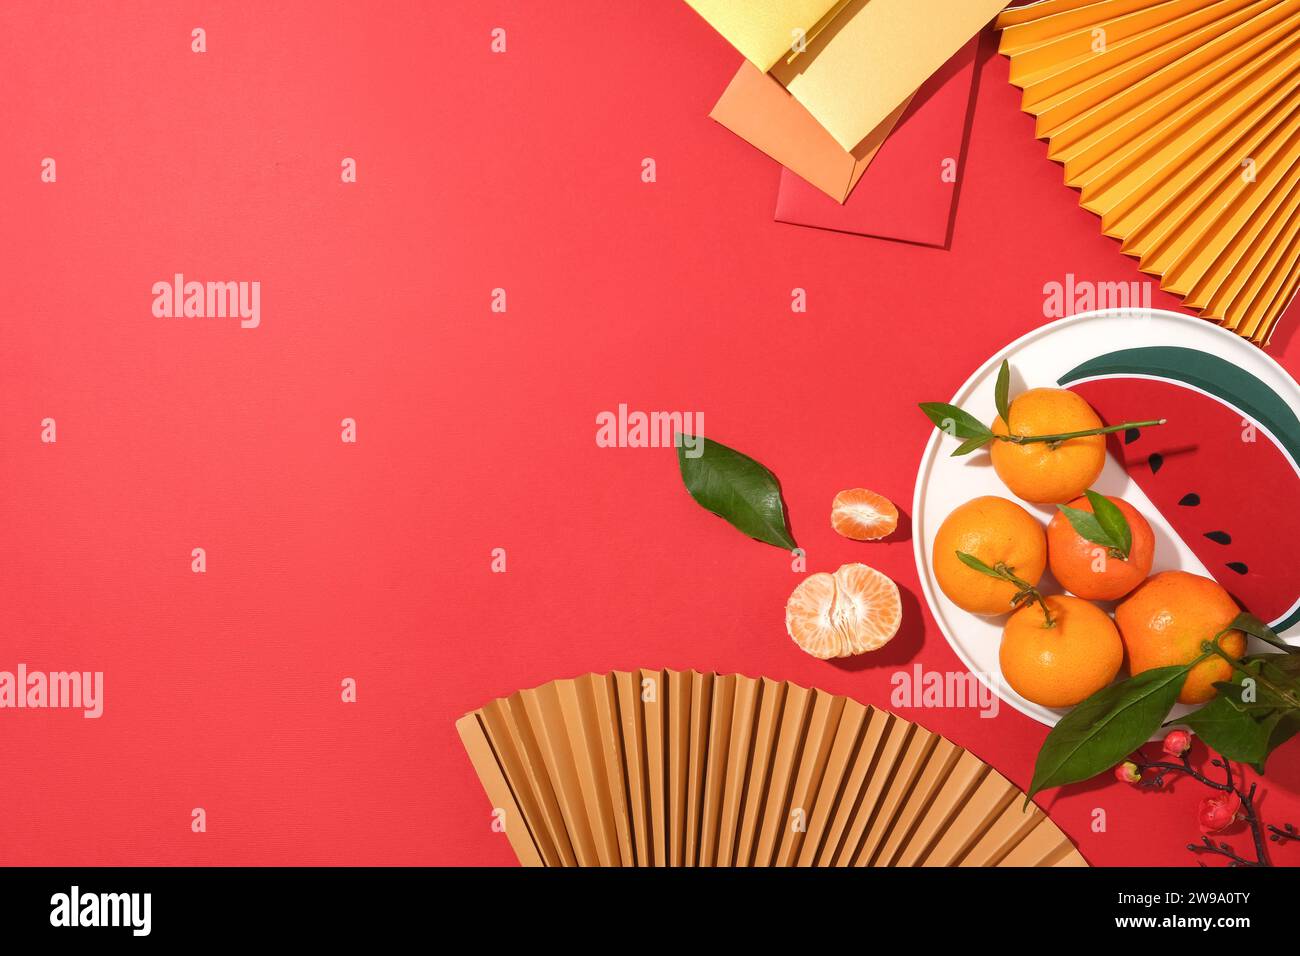 On a bright red background, paper fans, fruit dish and lucky money envelopes are decorated on the right side of the frame. Space on the left for text Stock Photo